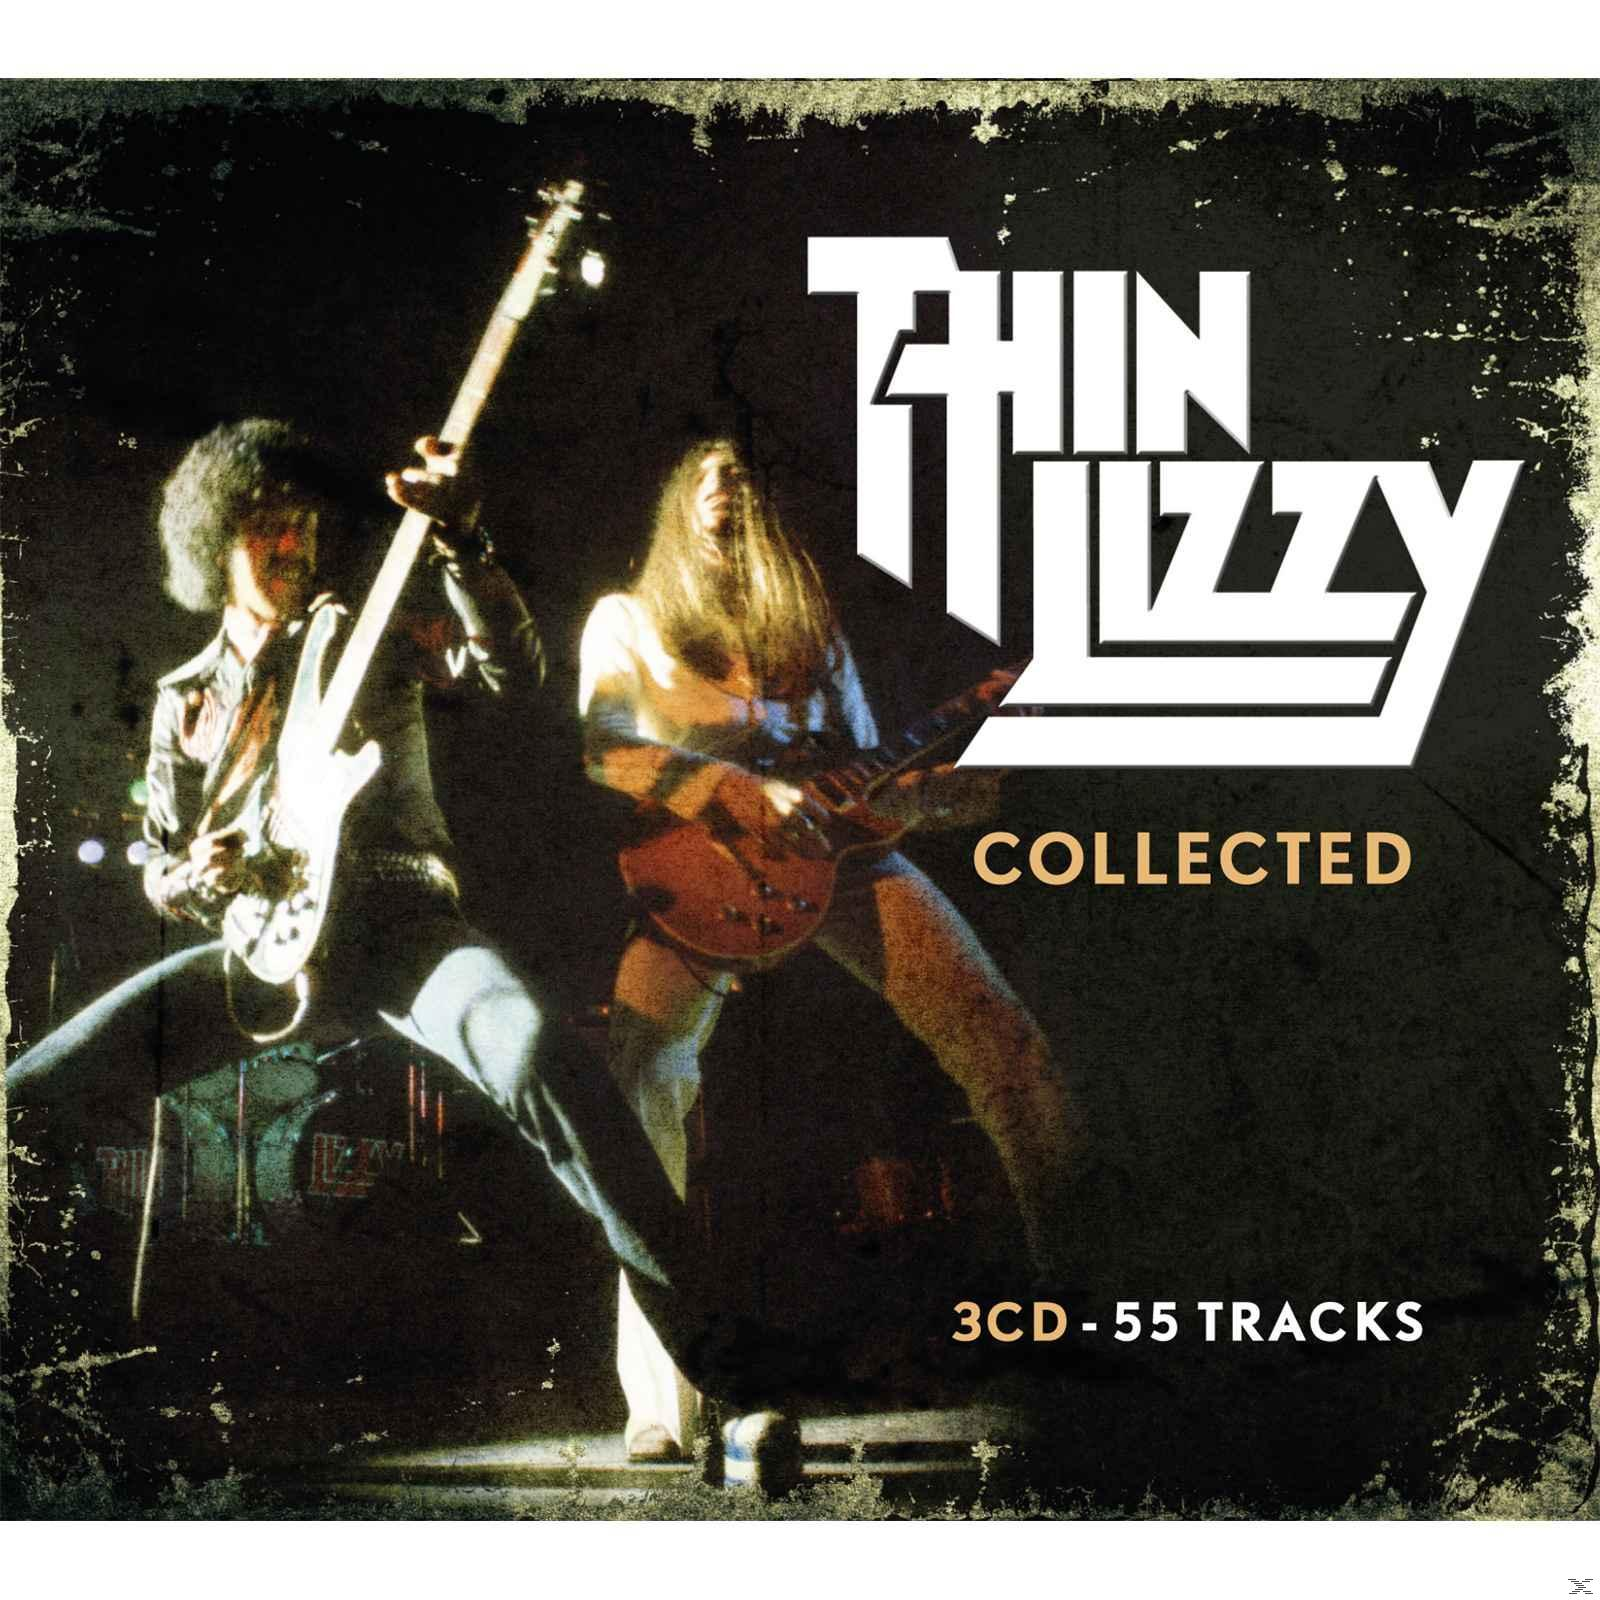 - Lizzy Collected (CD) Thin -